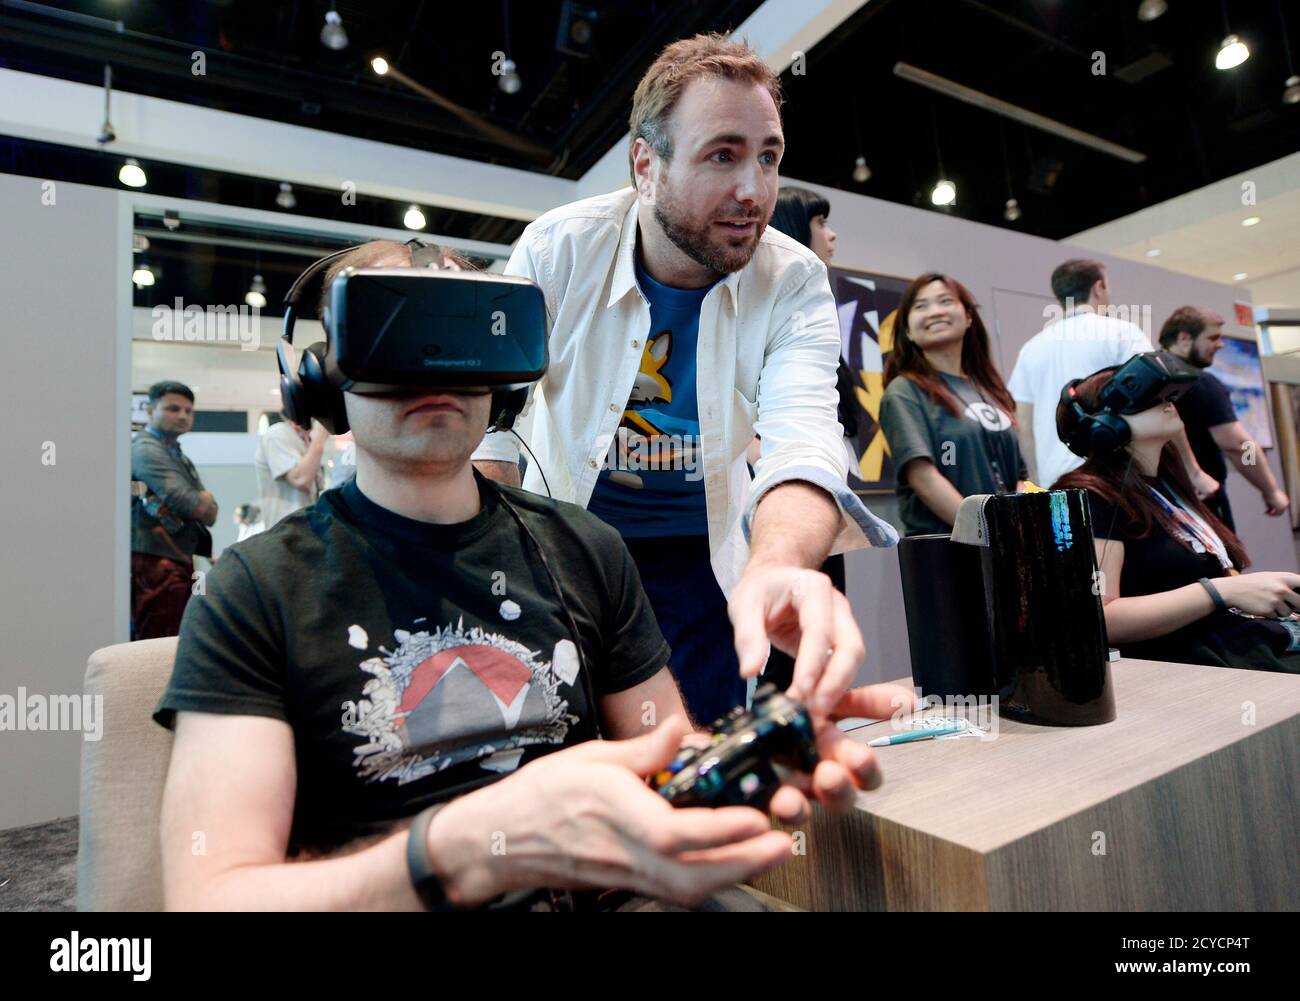 Paul Bettner, co-founder of Playful Corp which created the new "Lucky's  Tale" game for Oculus Rift, helps an attendee try the Oculus VR Inc. Rift  Development Kit 2 (DK2) headset at the